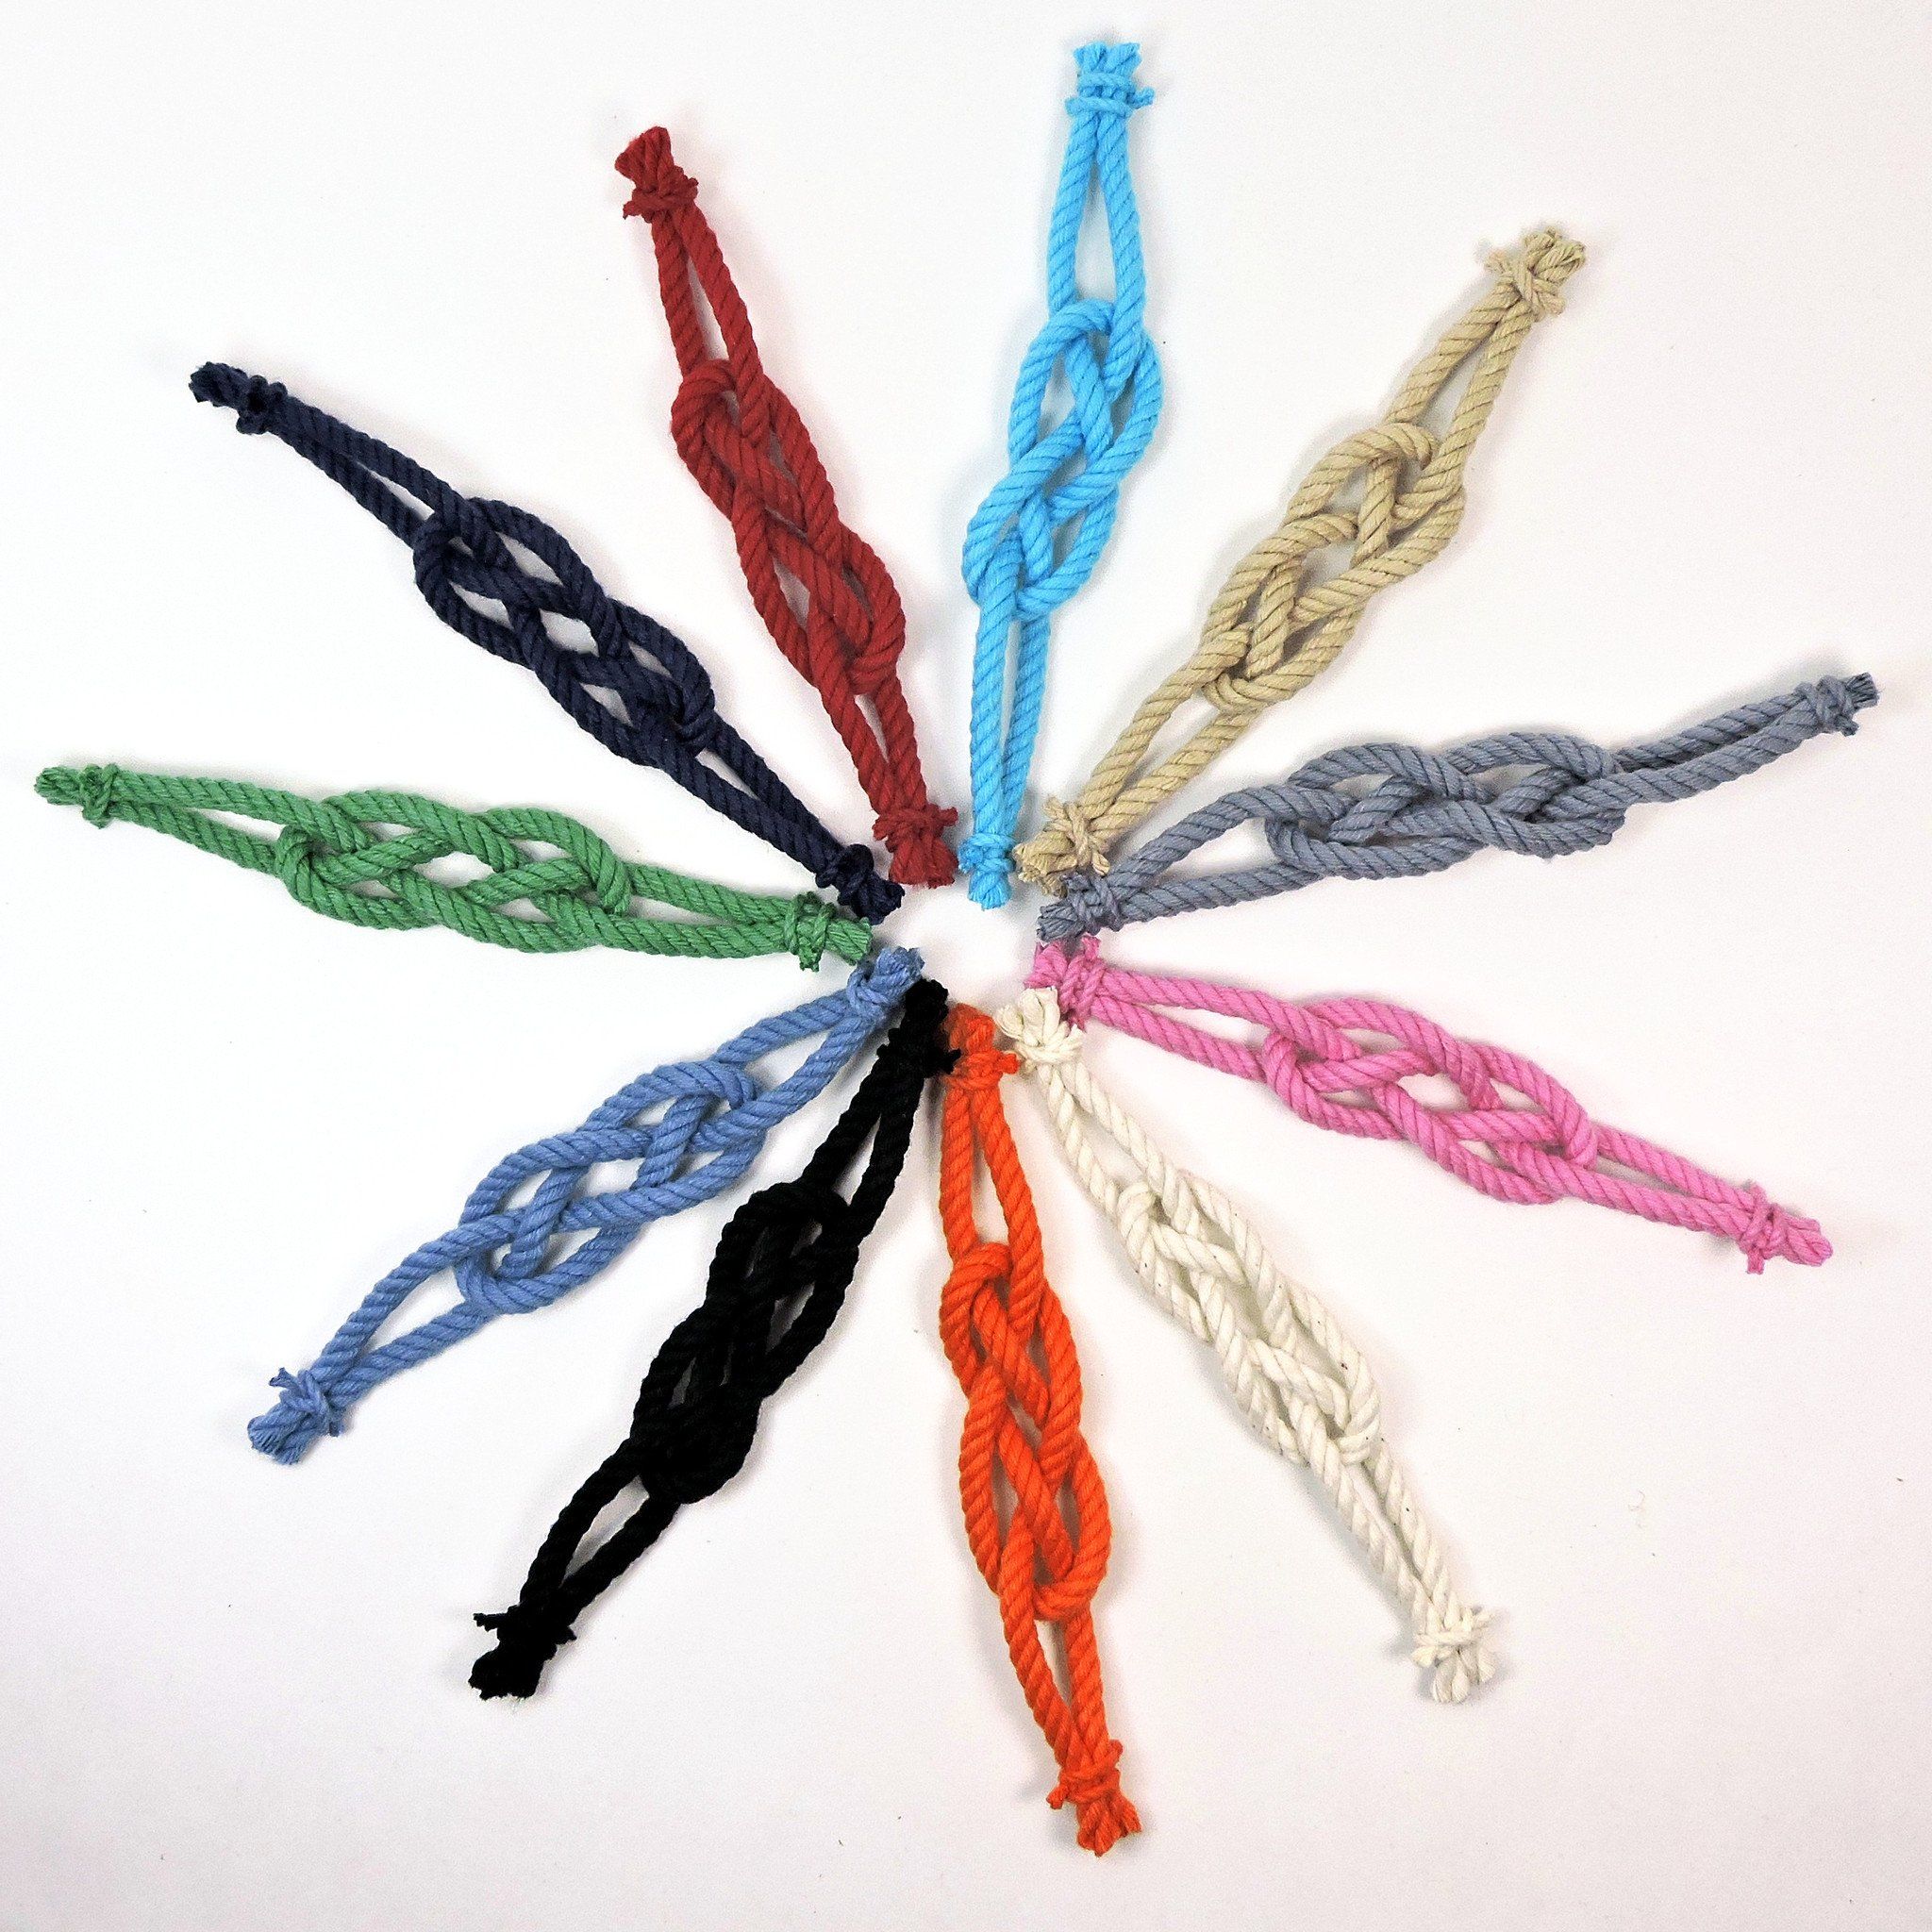 Discover more than 85 carrick bend knot bracelet latest  POPPY